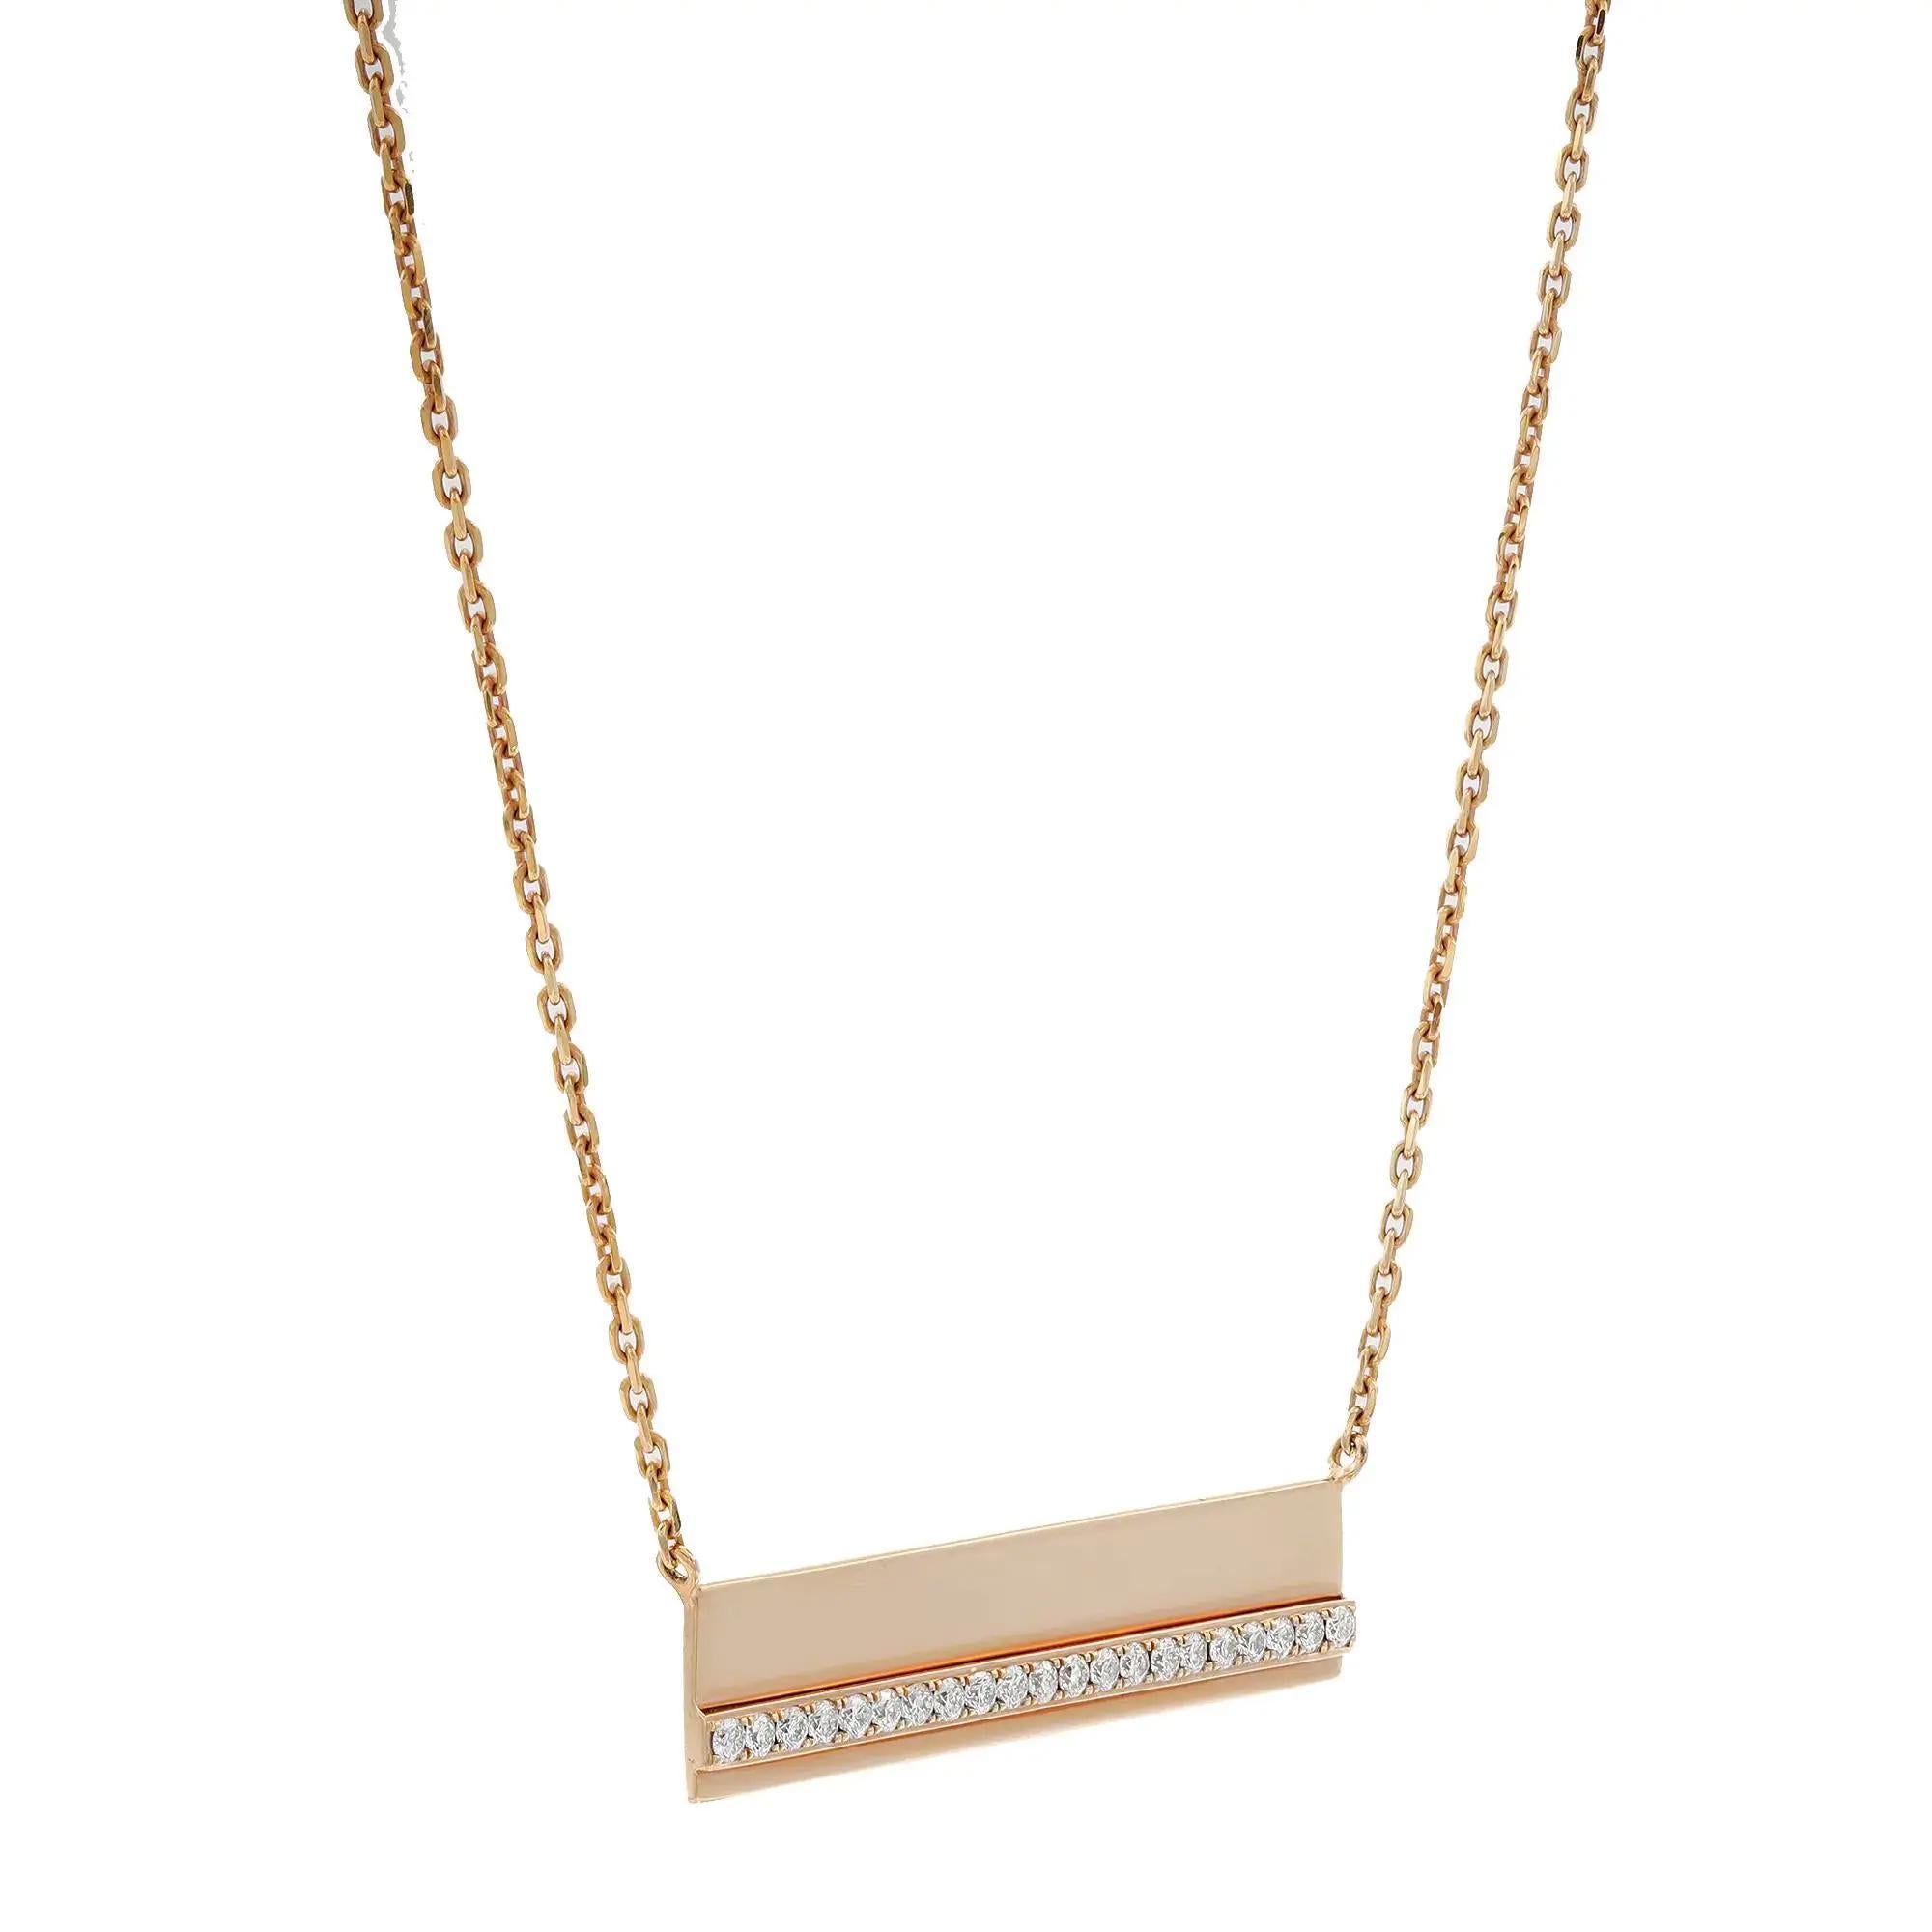 Modern Messika 0.36Cttw Kate Diamond Bar Pendant Chain Necklace 18K Rose Gold 17 Inches For Sale